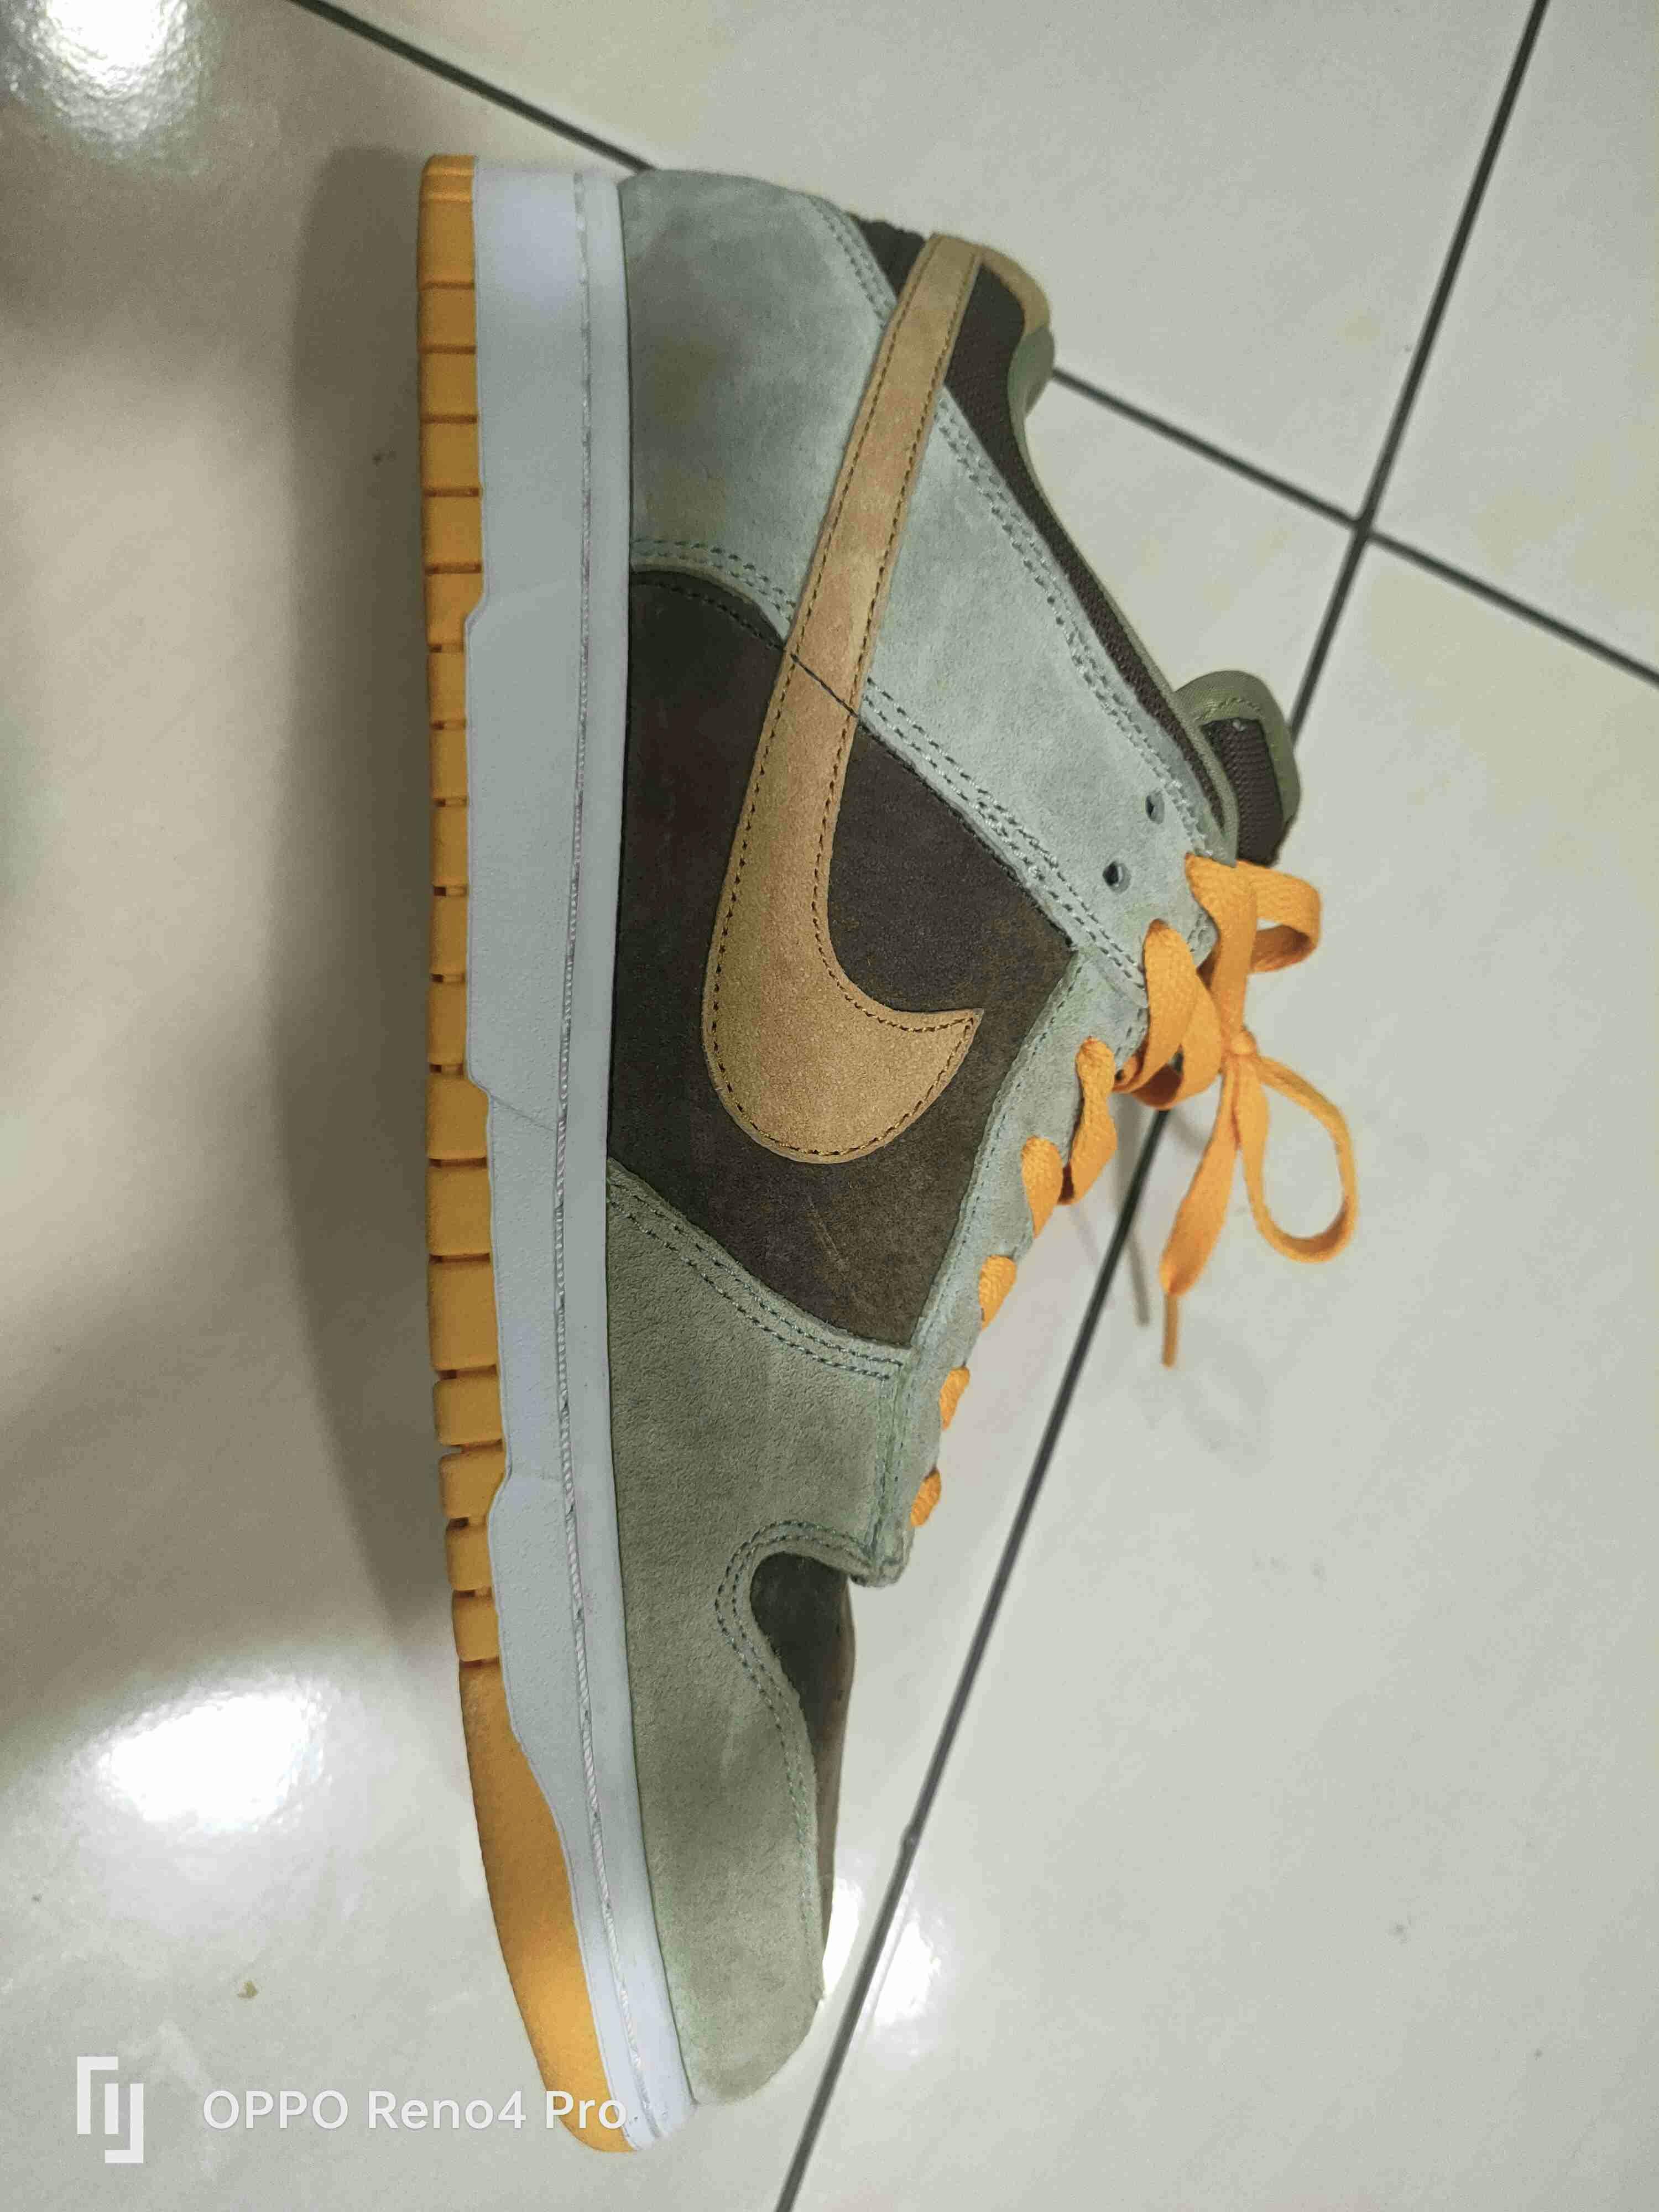 Nike Dunk Low 'Dusty Olive' DH5360‑300 - DH5360-300 - Novelship